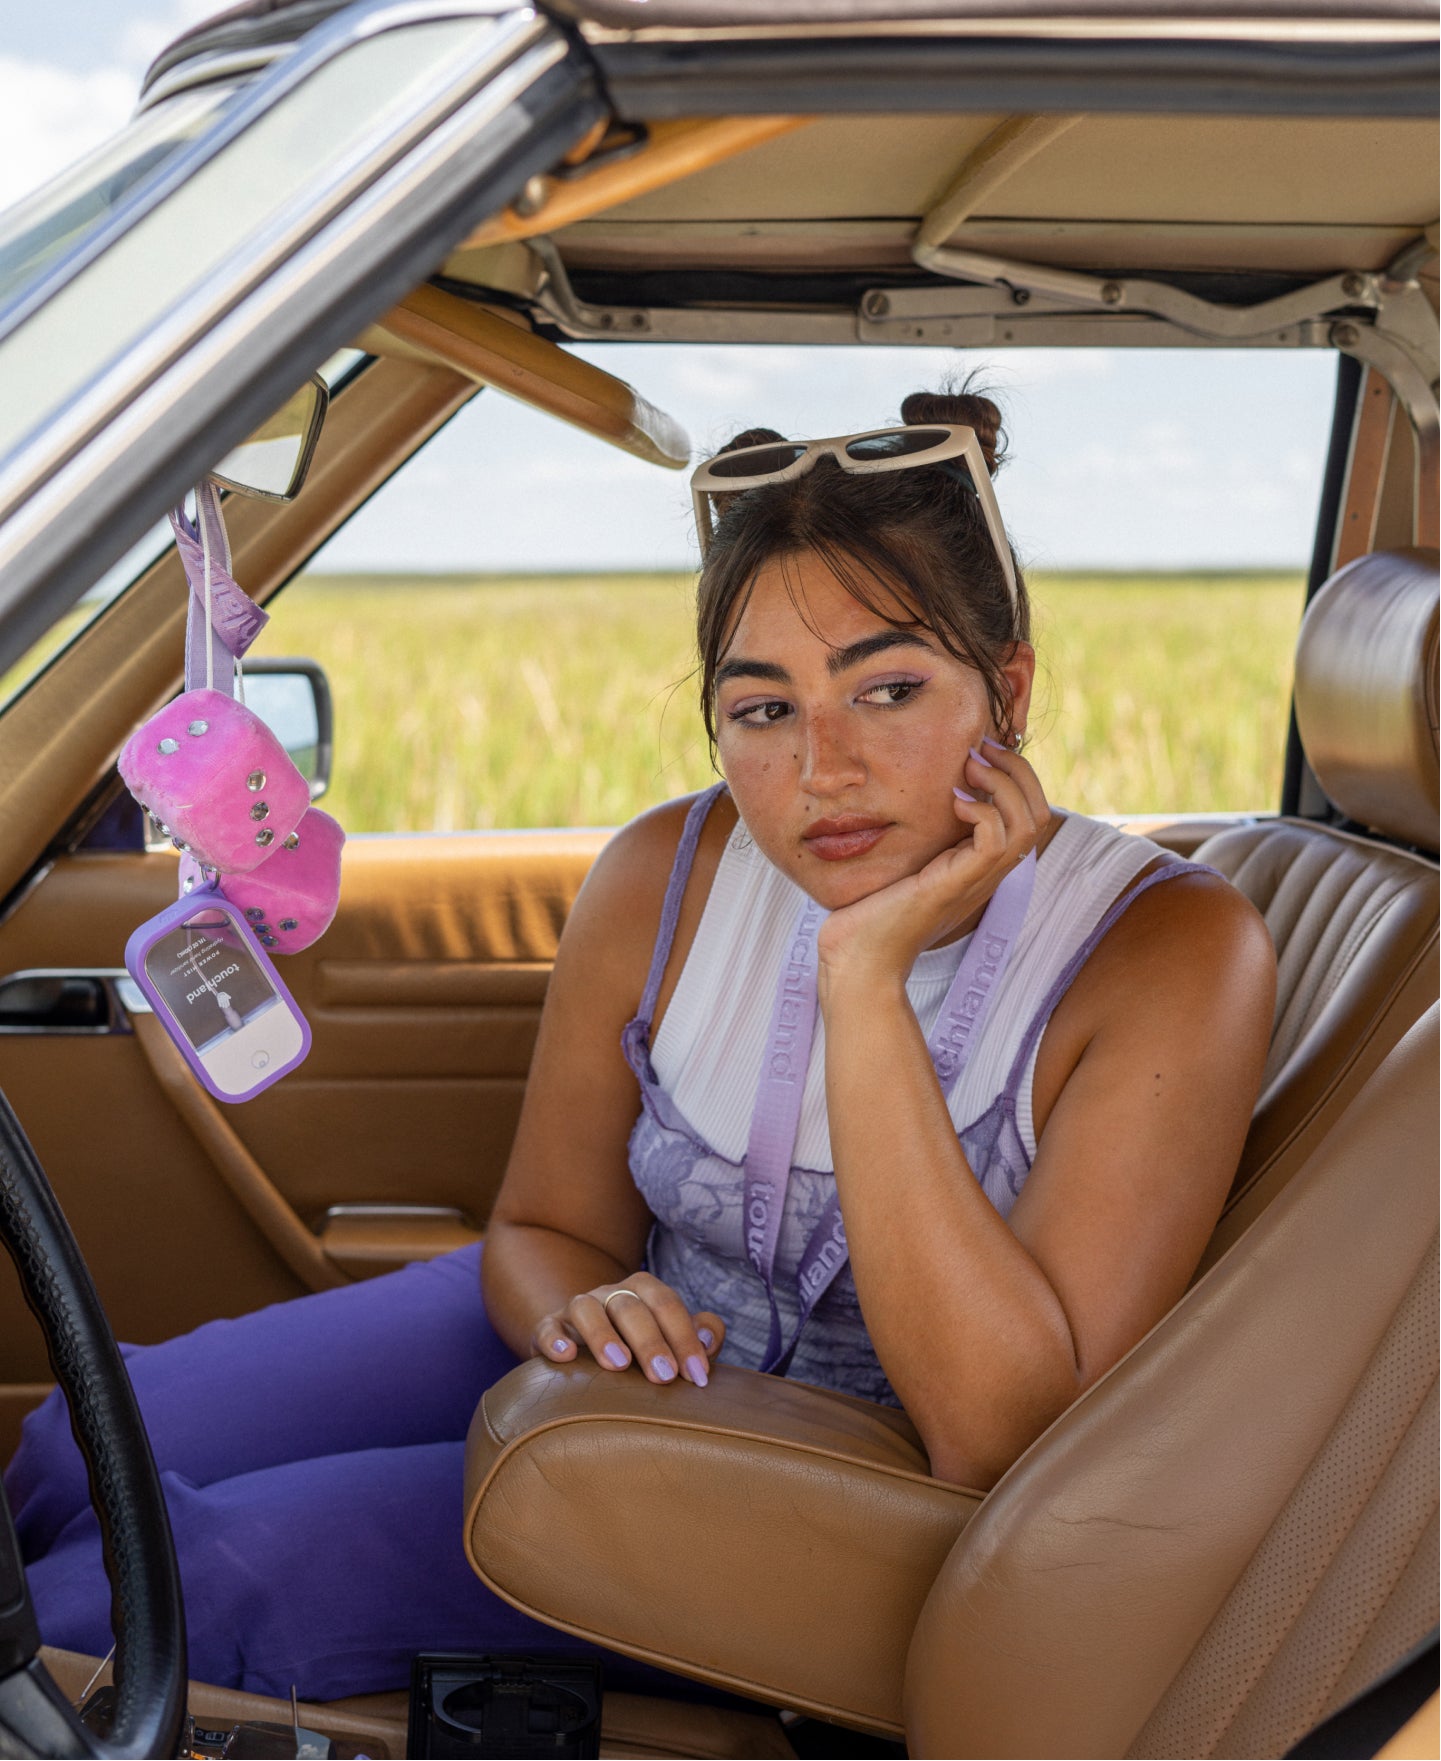 Female model is resting her arm on the middle arm rest of a vintage car, on the rearview mirror a lilac lanyard with a power mist bottle is hanging down